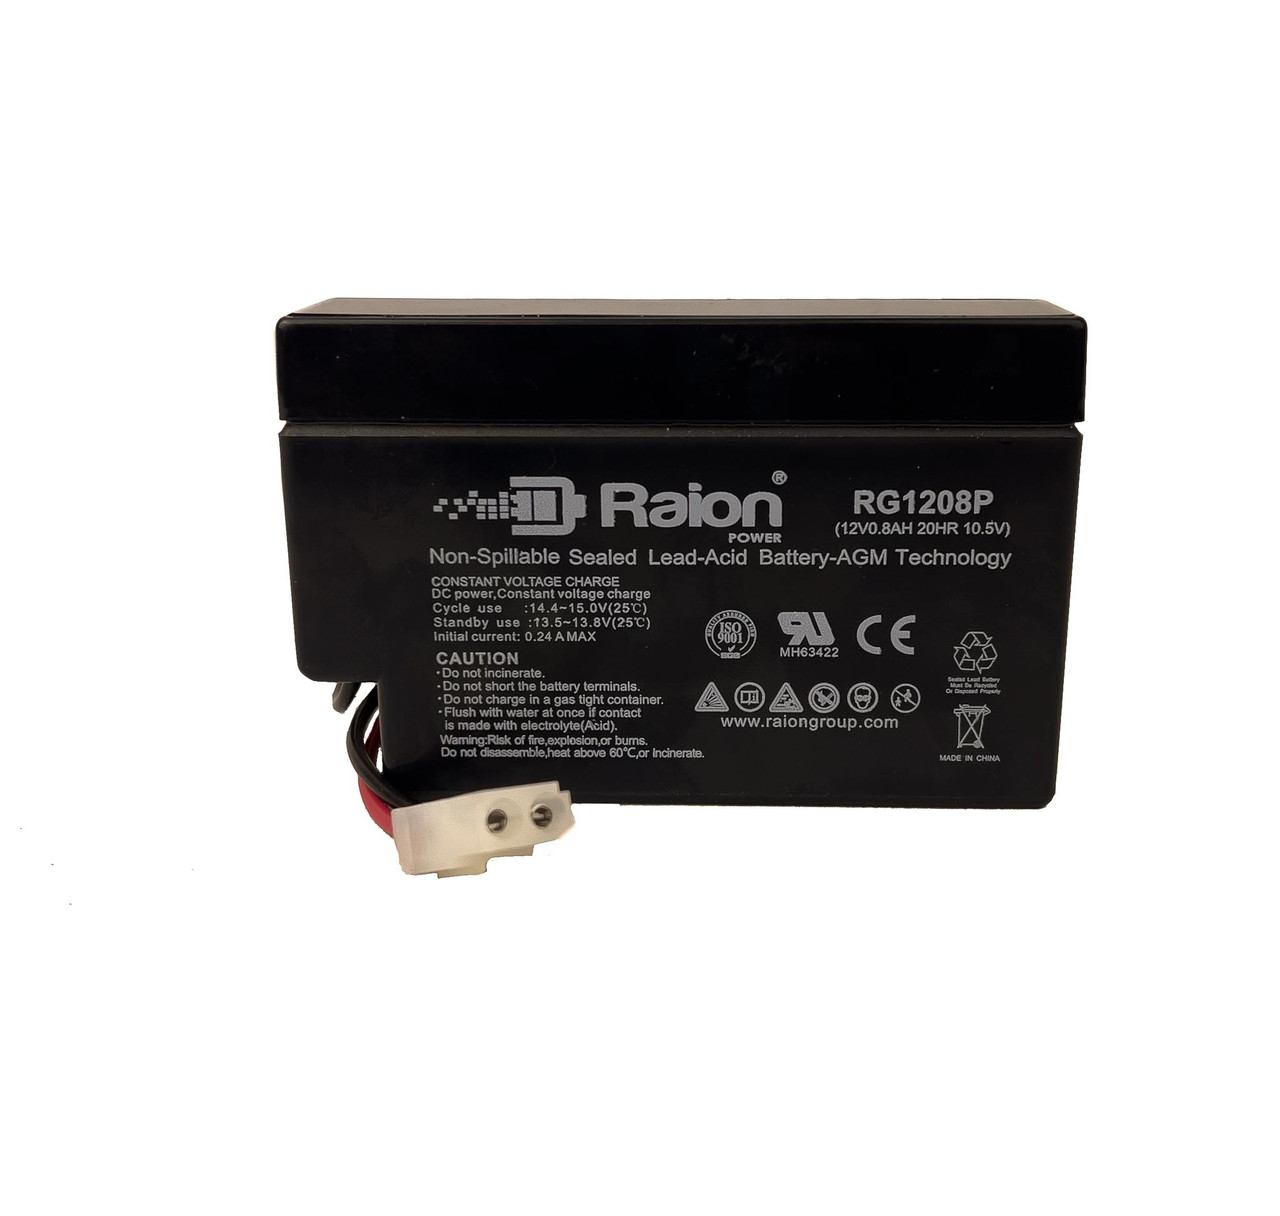 Raion Power 12V 0.8Ah SLA Battery With T1 Terminals For Fengri 6-FM-0.8